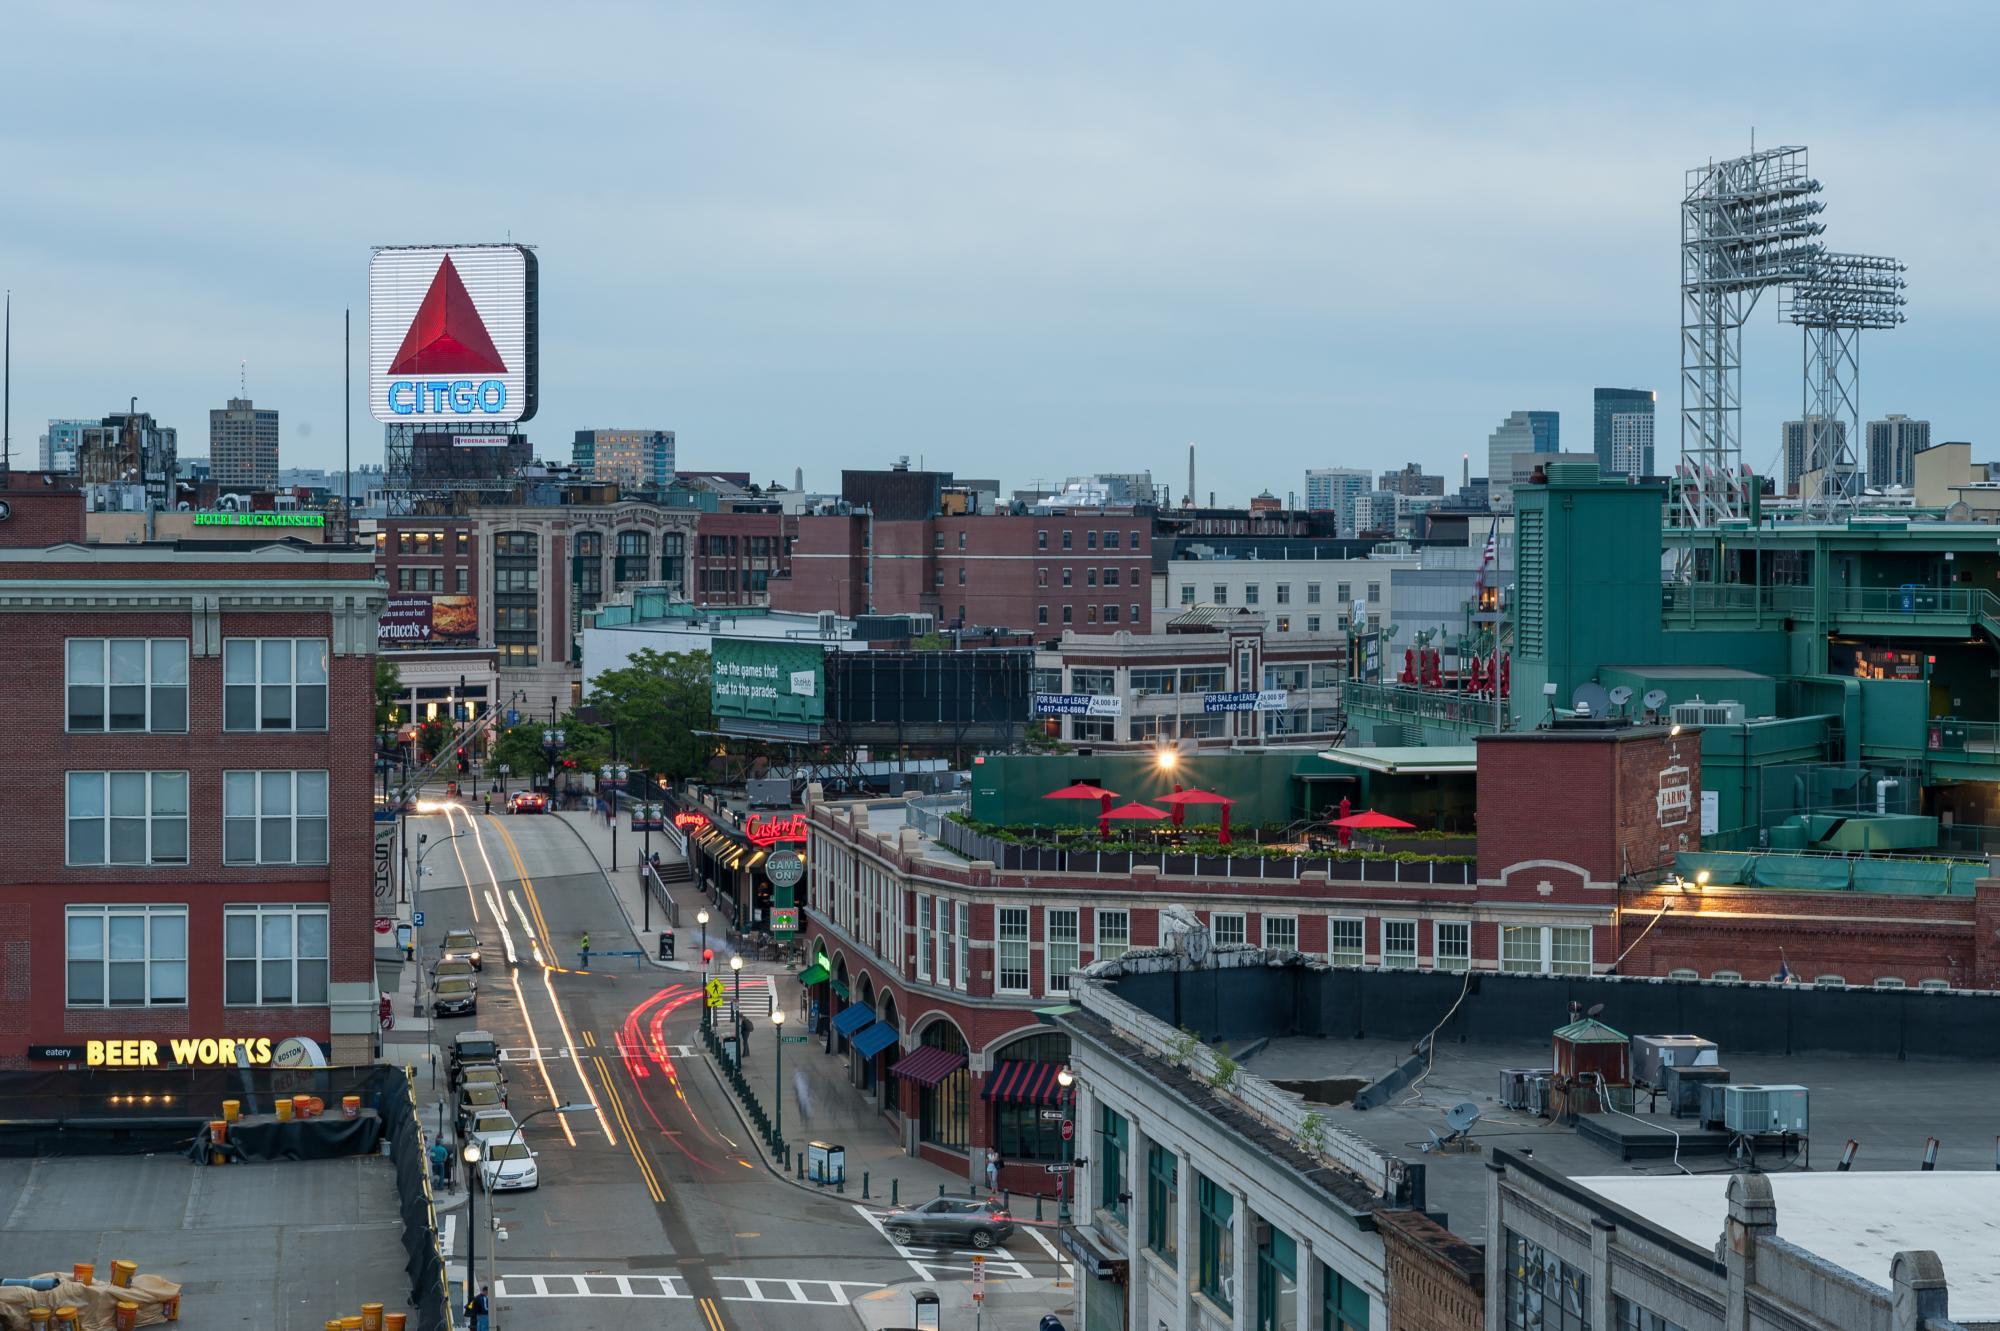 Fenway area, with the park to the right and the CITGO sign in the background.